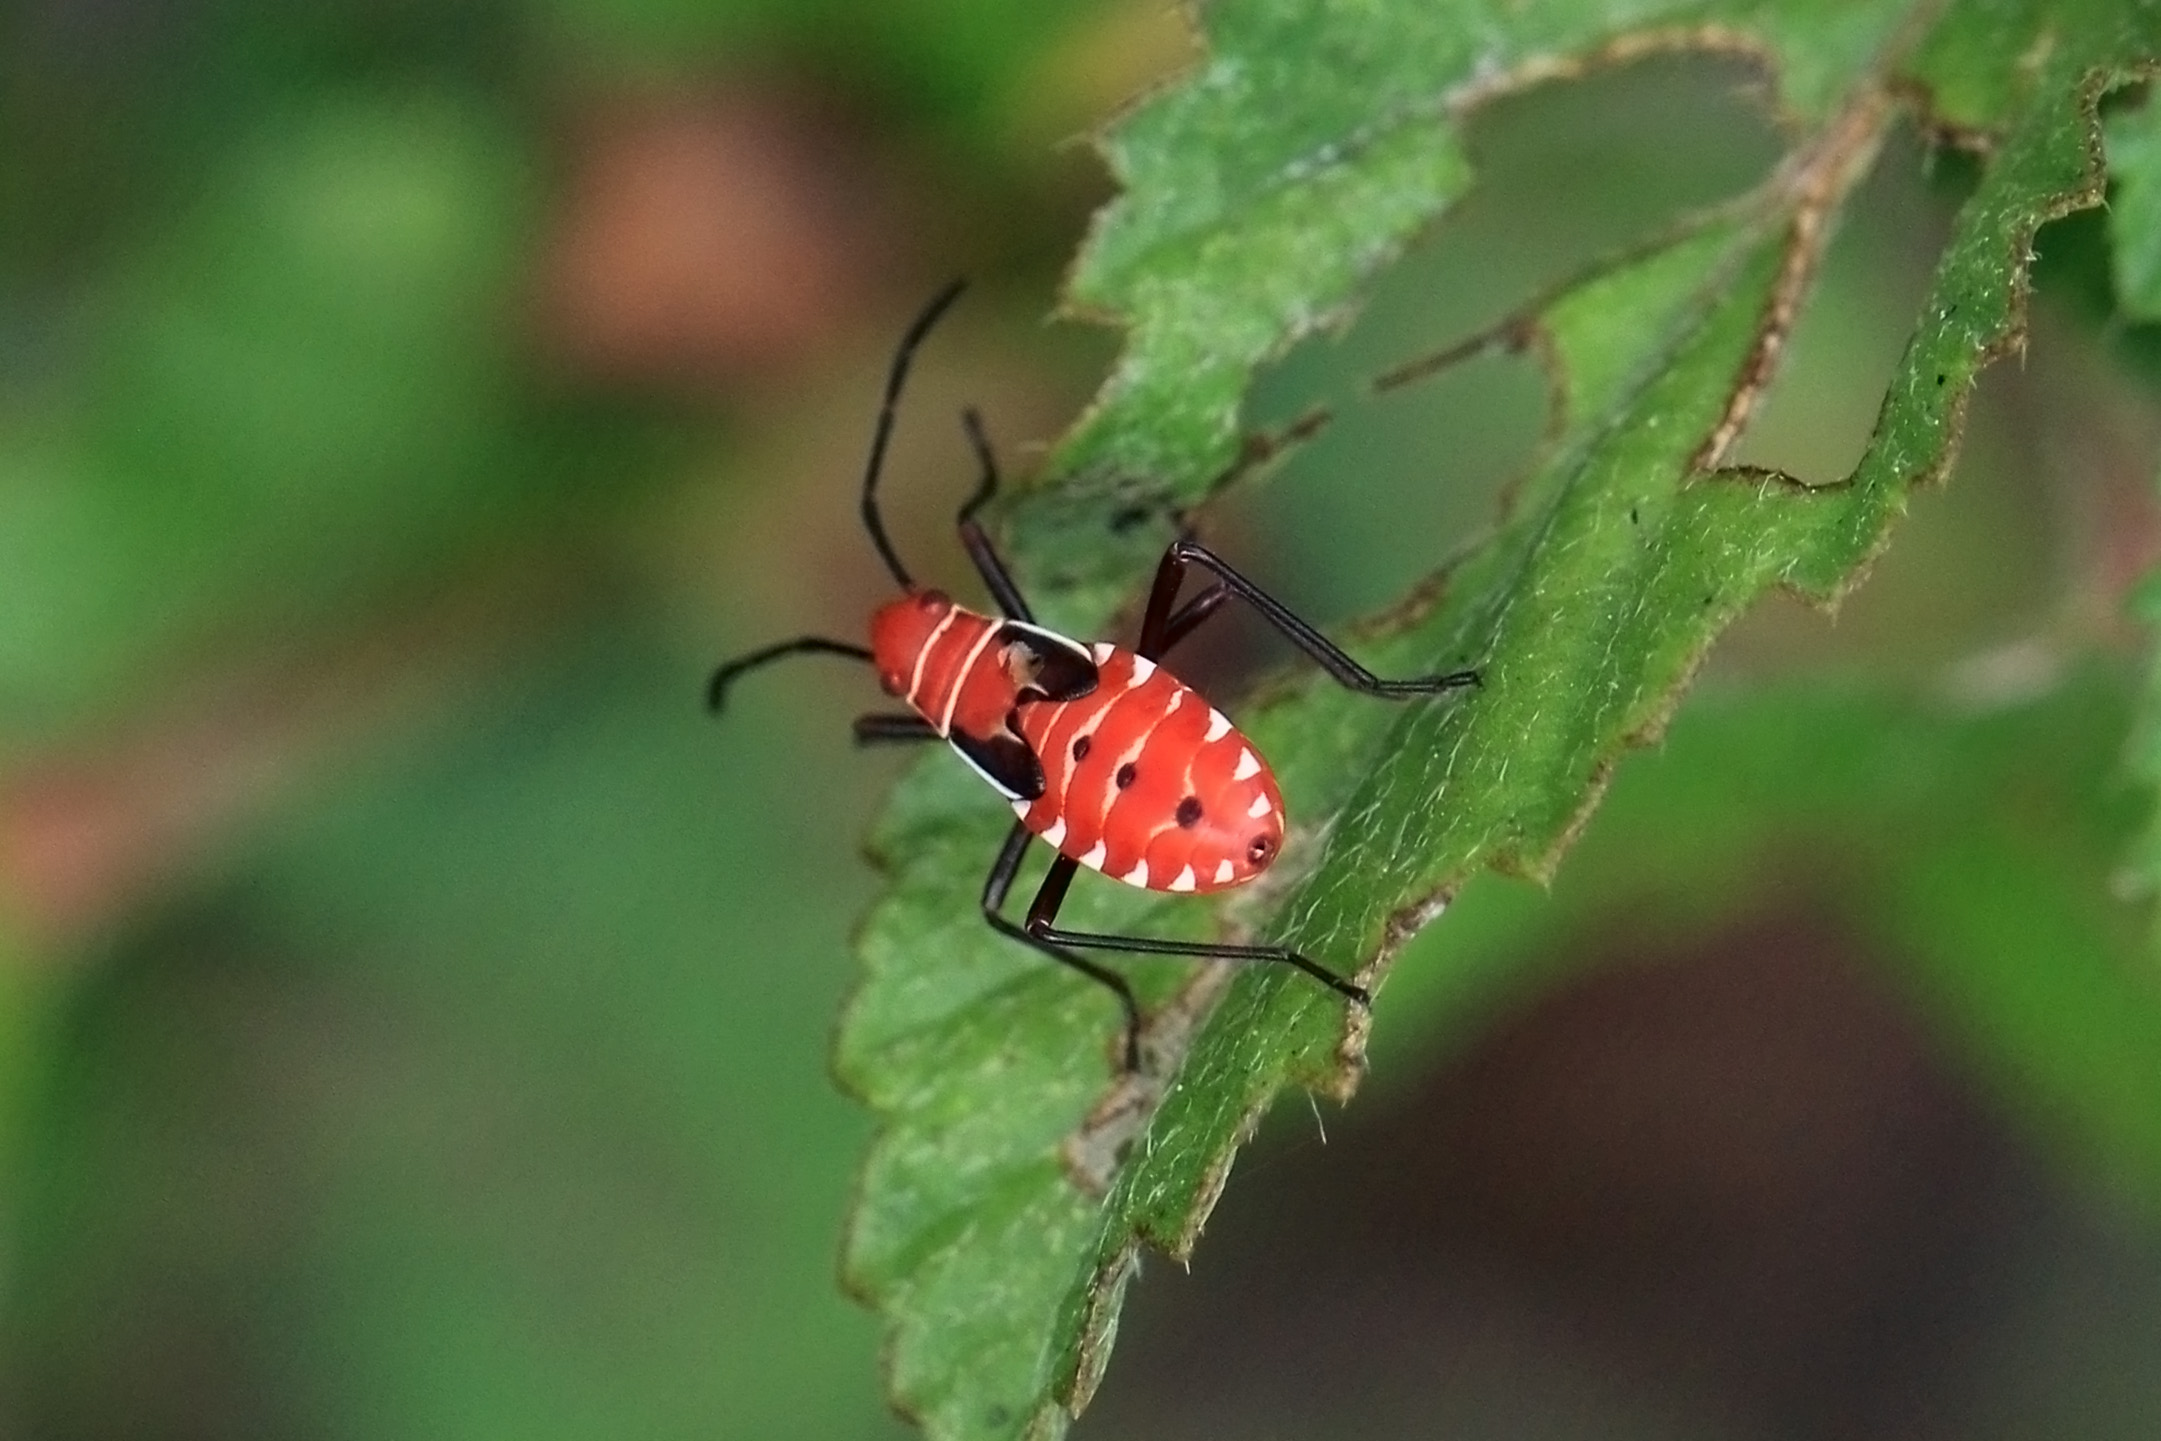 St Andrew's cotton stainer (Dysdercus andreae) nymph